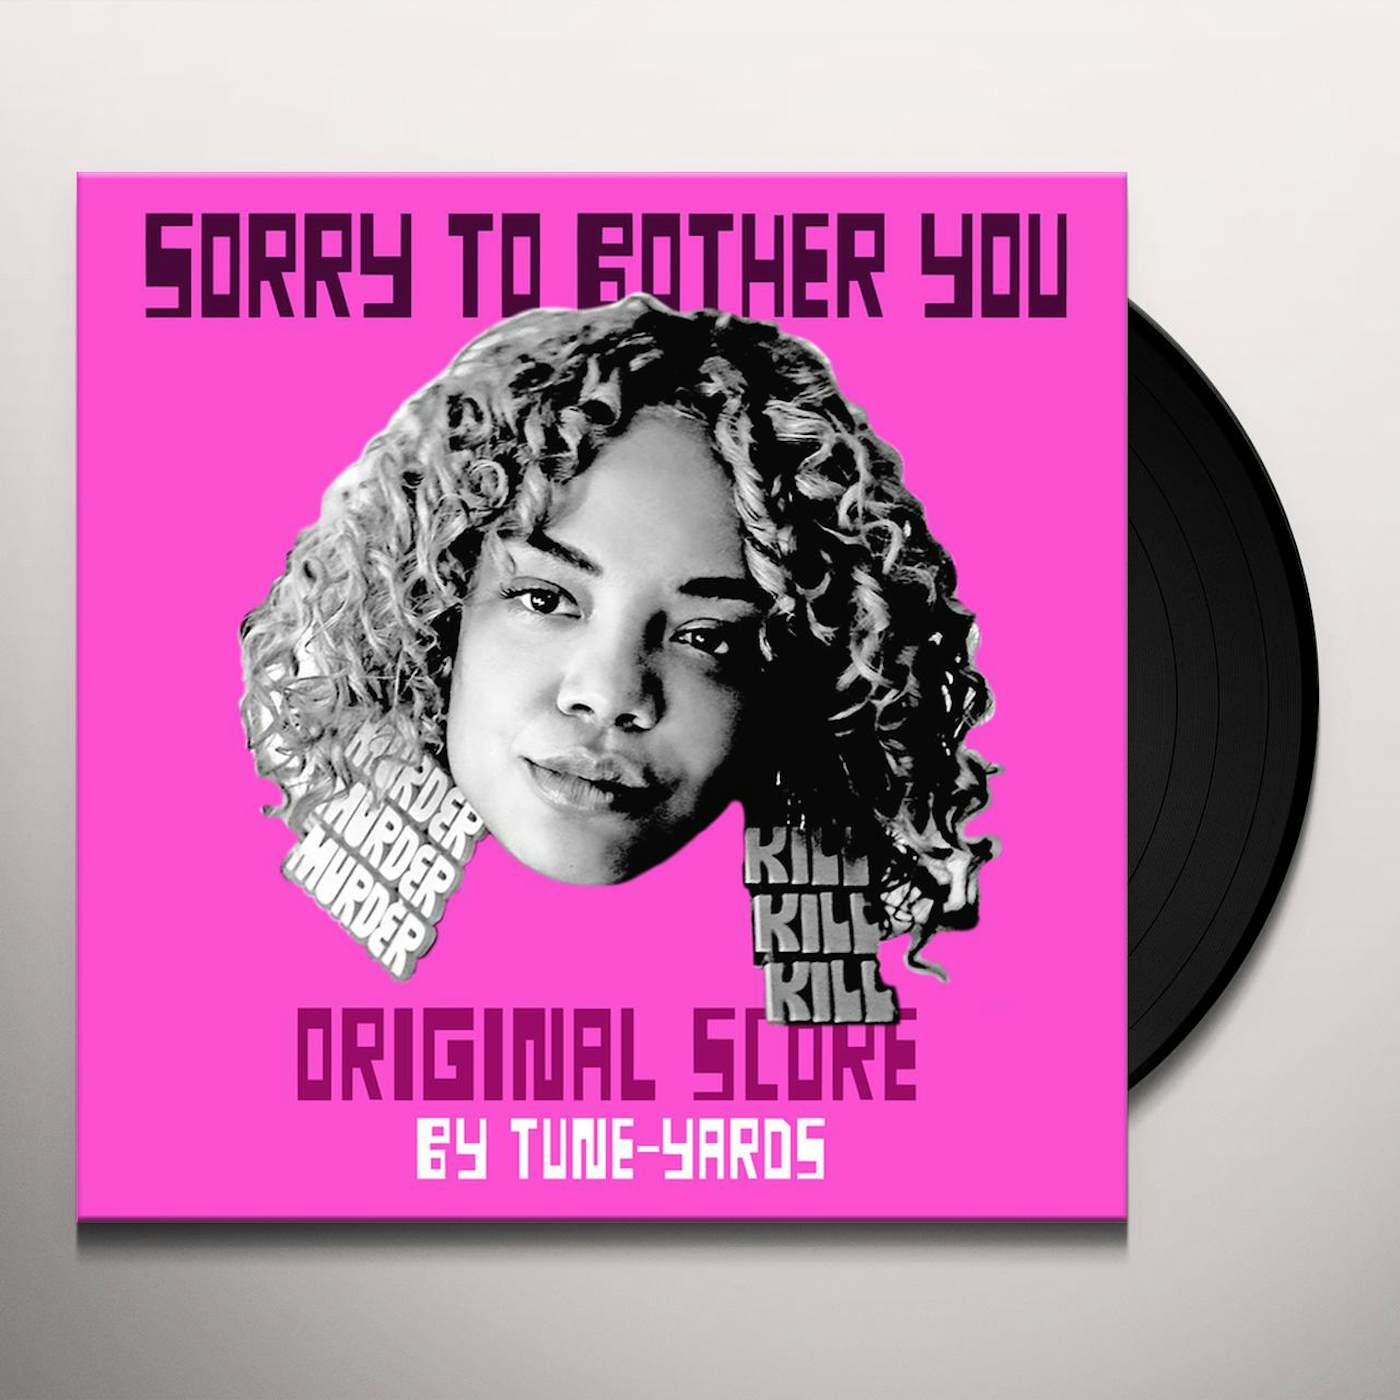 Tune-Yards RSD-sorry to bother you (original score) Vinyl Record